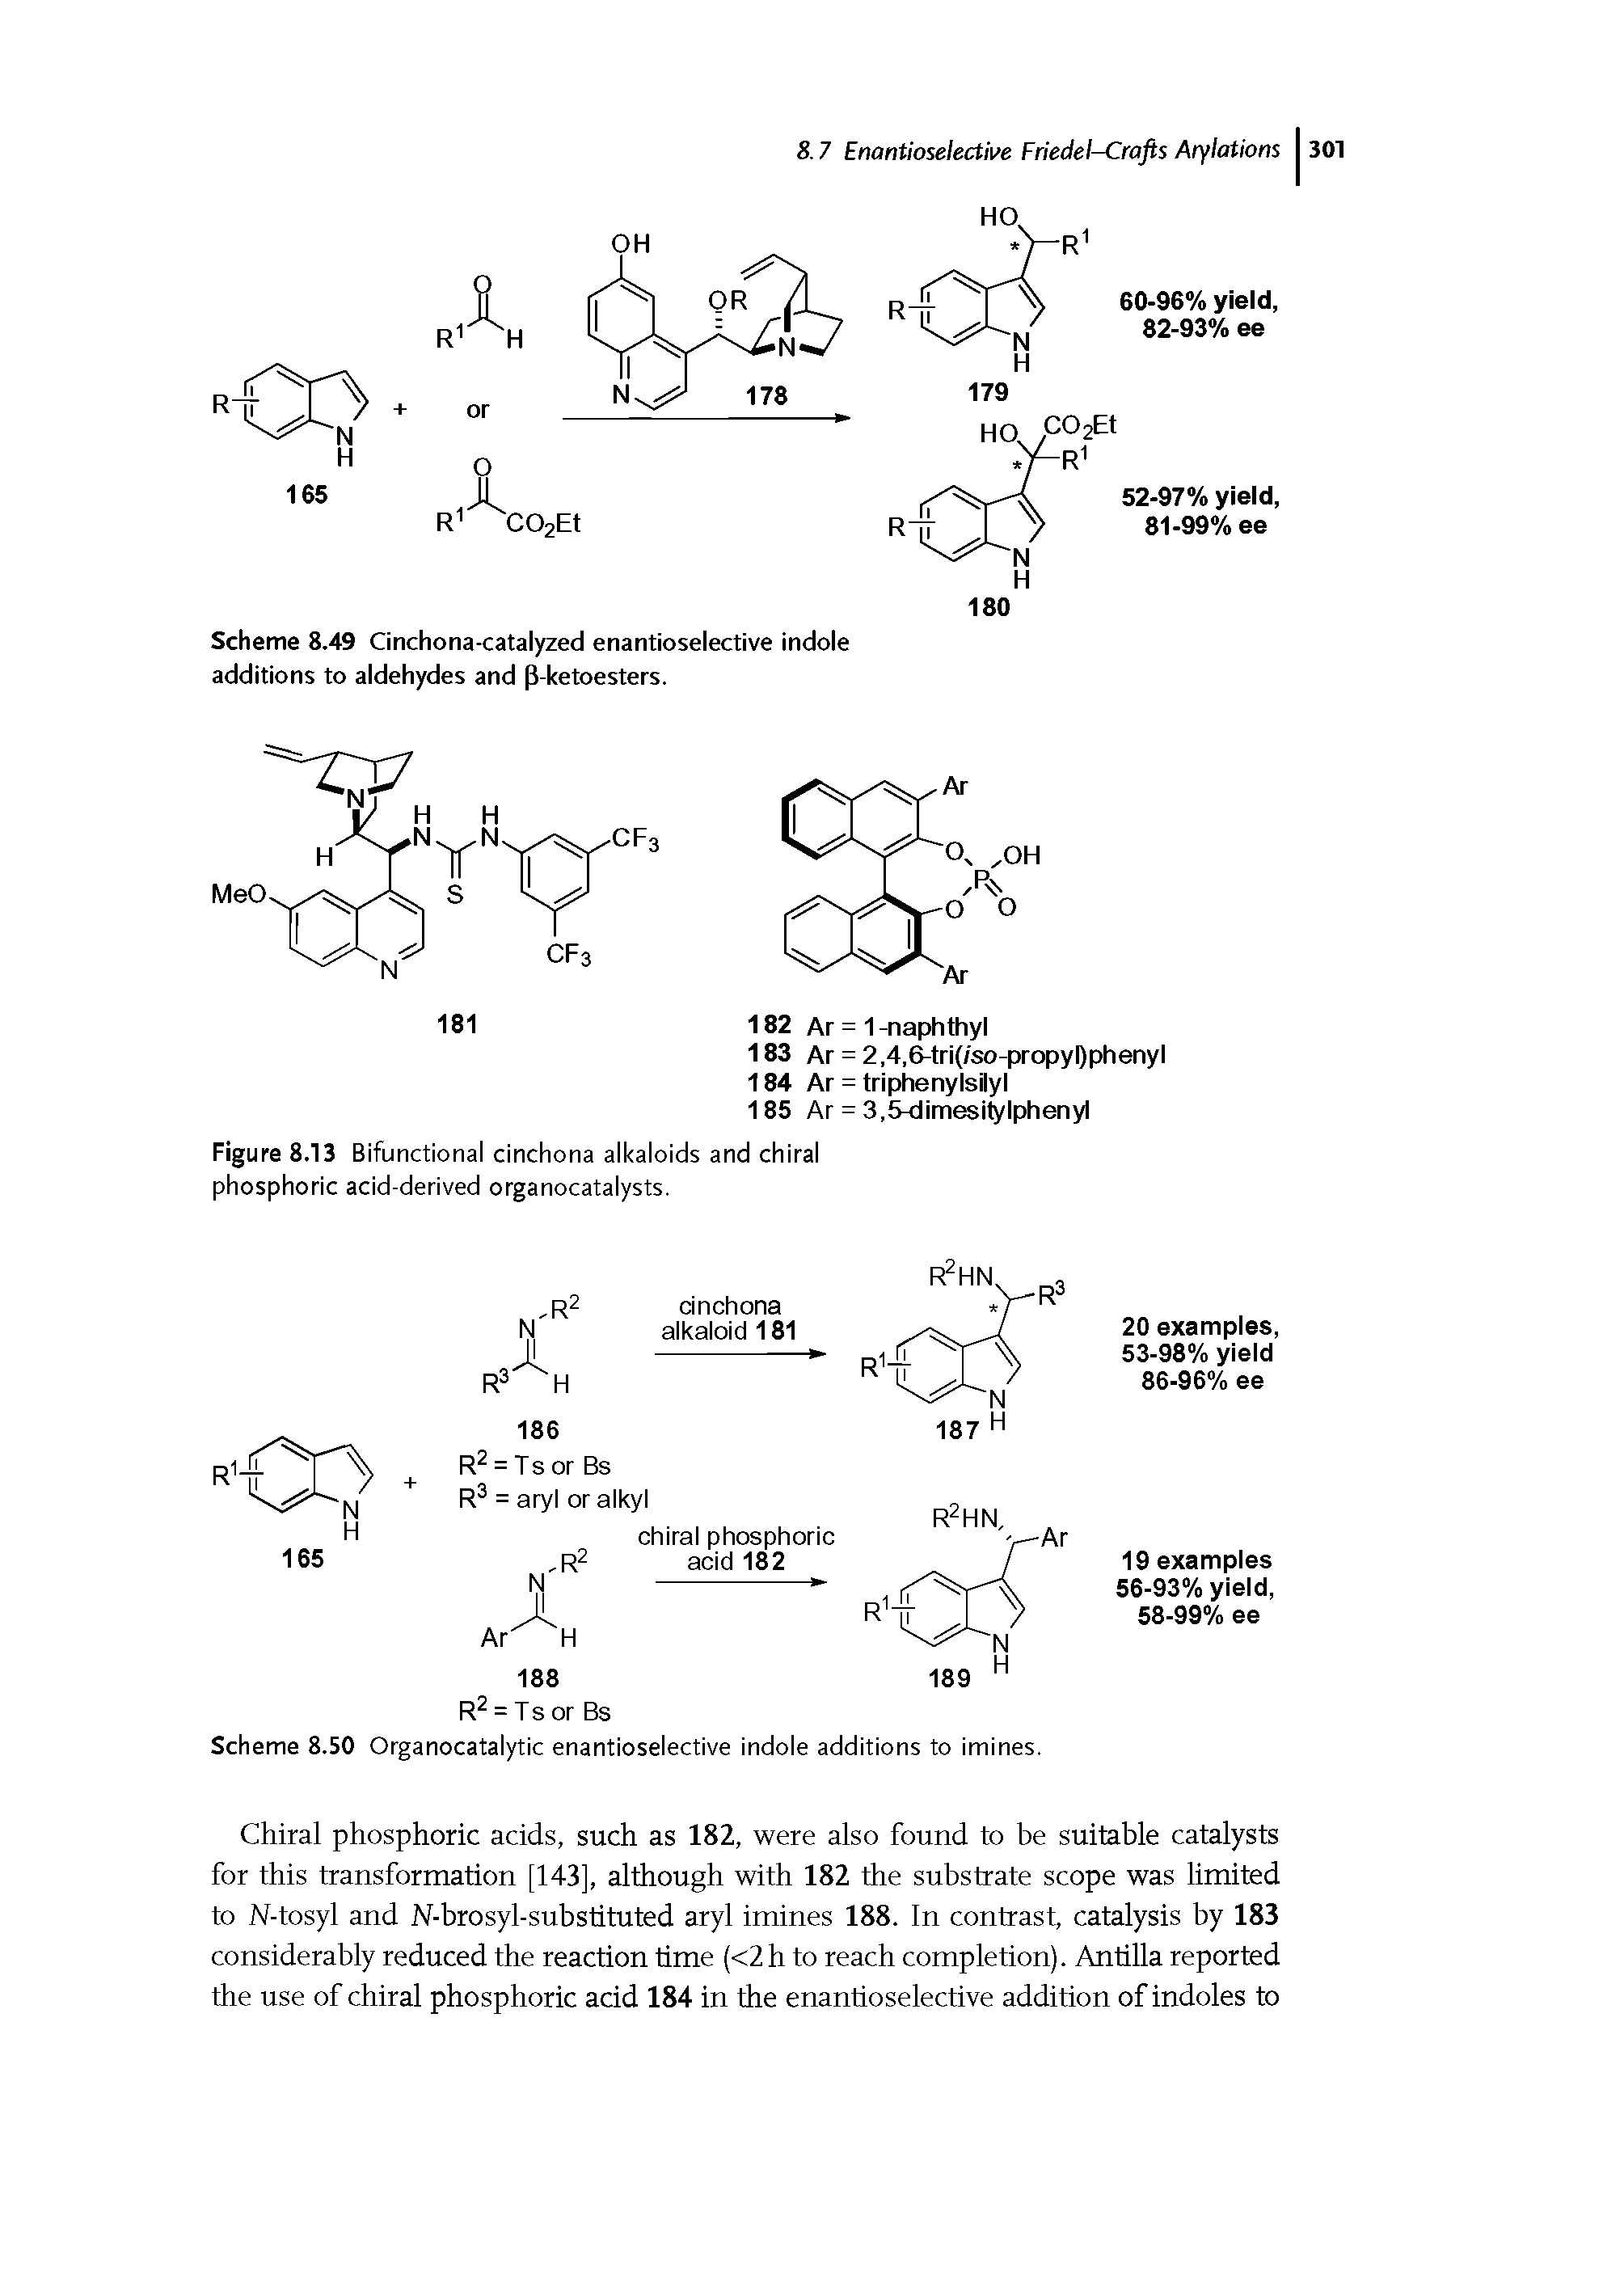 Scheme 8.49 Cinchona<atalyzed enantioselective indole additions to aldehydes and P-ketoesters.